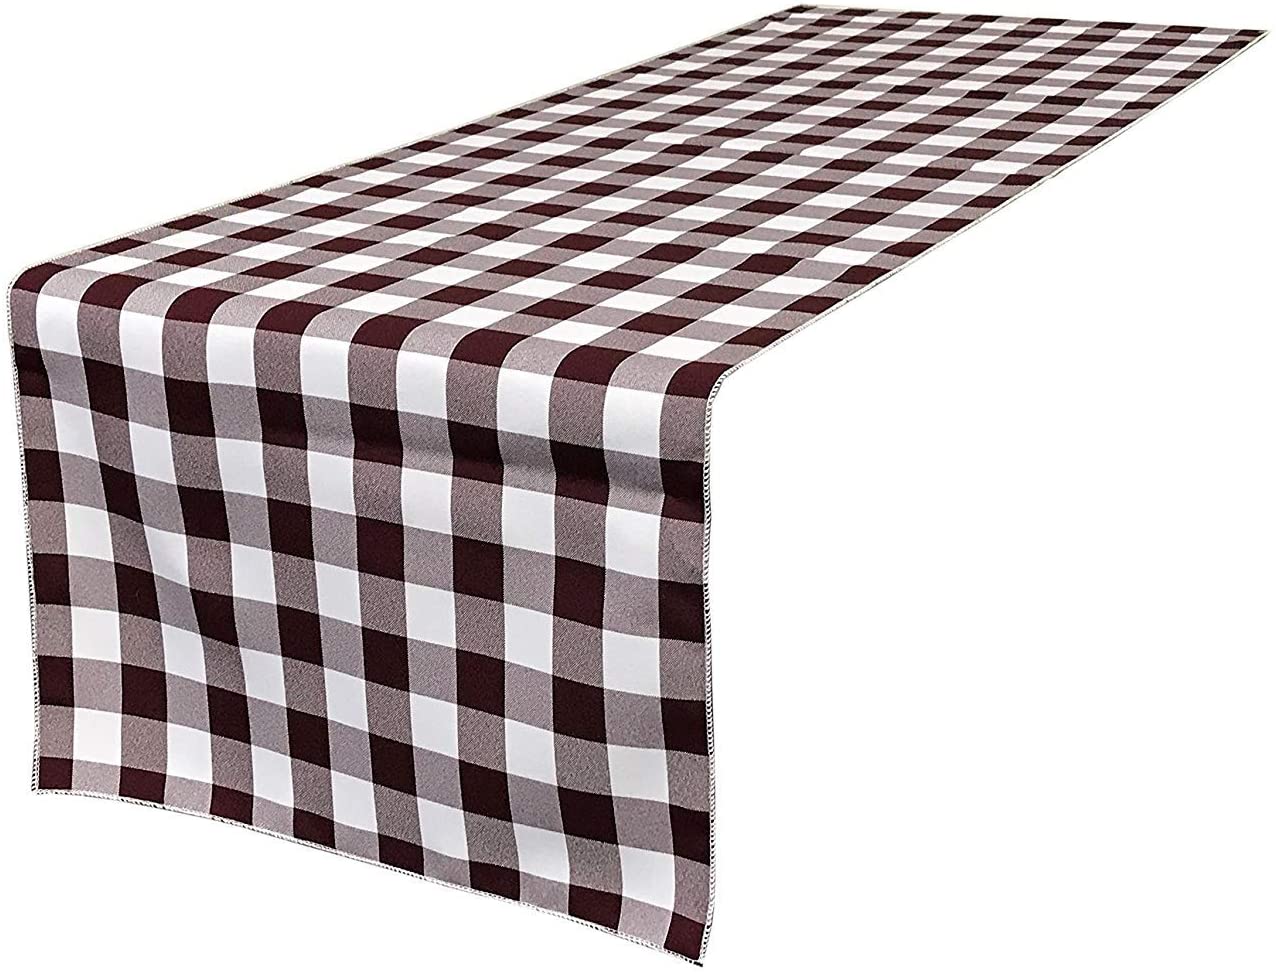 12" Wide by The Size of Your Choice, Polyester Poplin Gingham, Checkered, Plaid Table Runner (White & Burgundy,